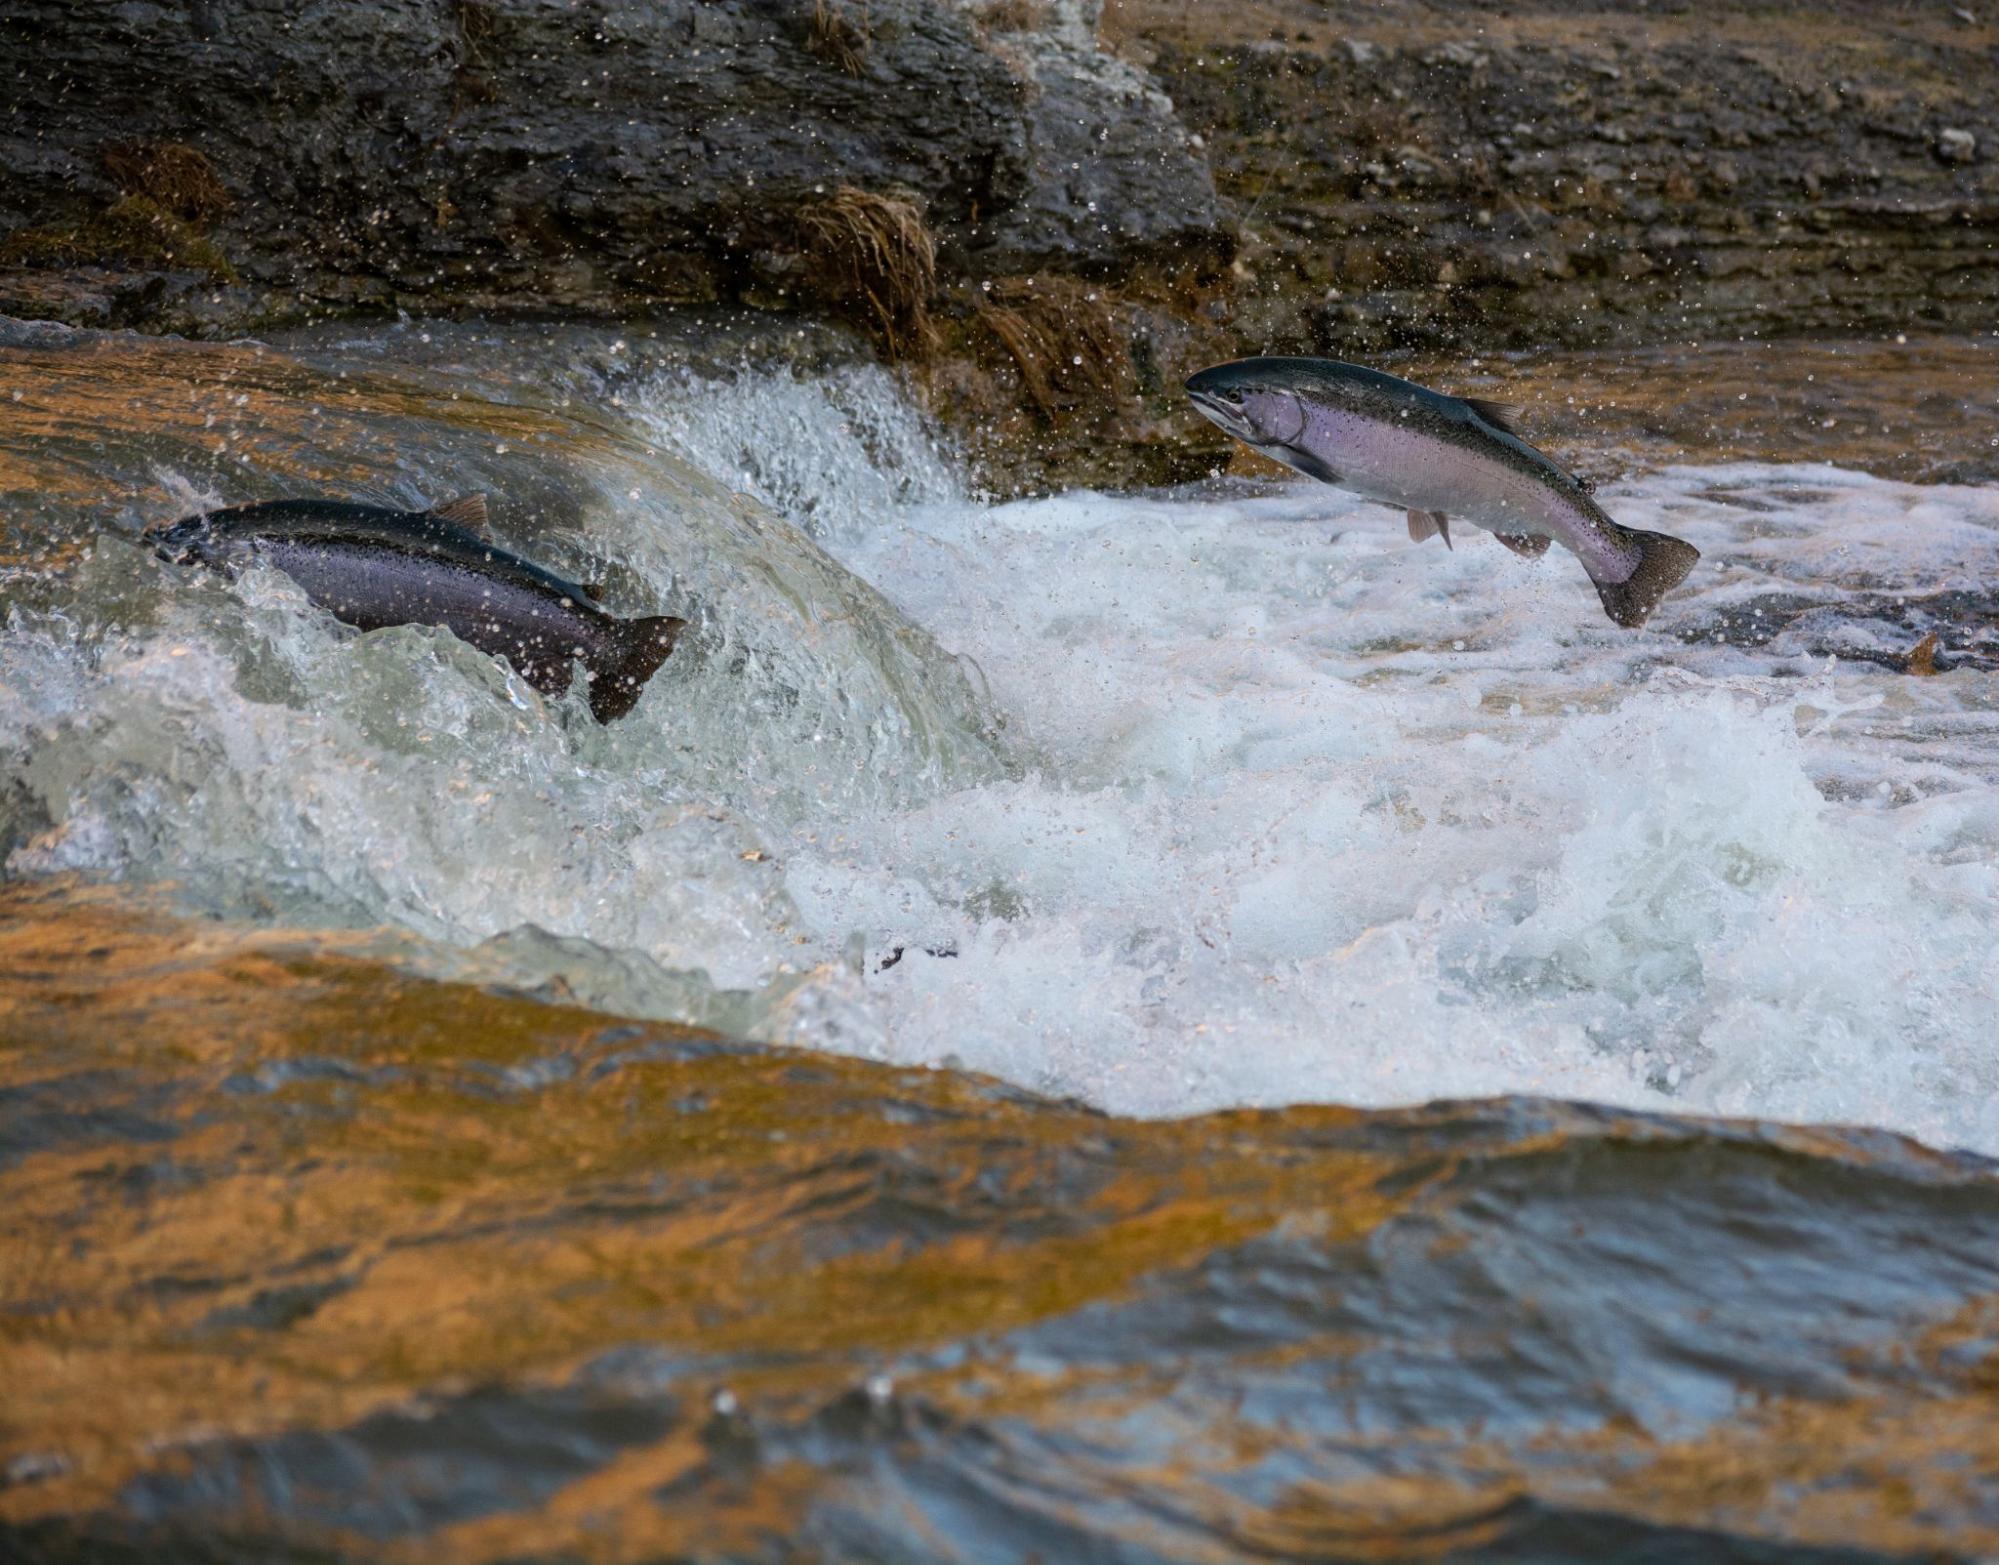 Two salmon leaping out of the water, swimming upstream against the rapids